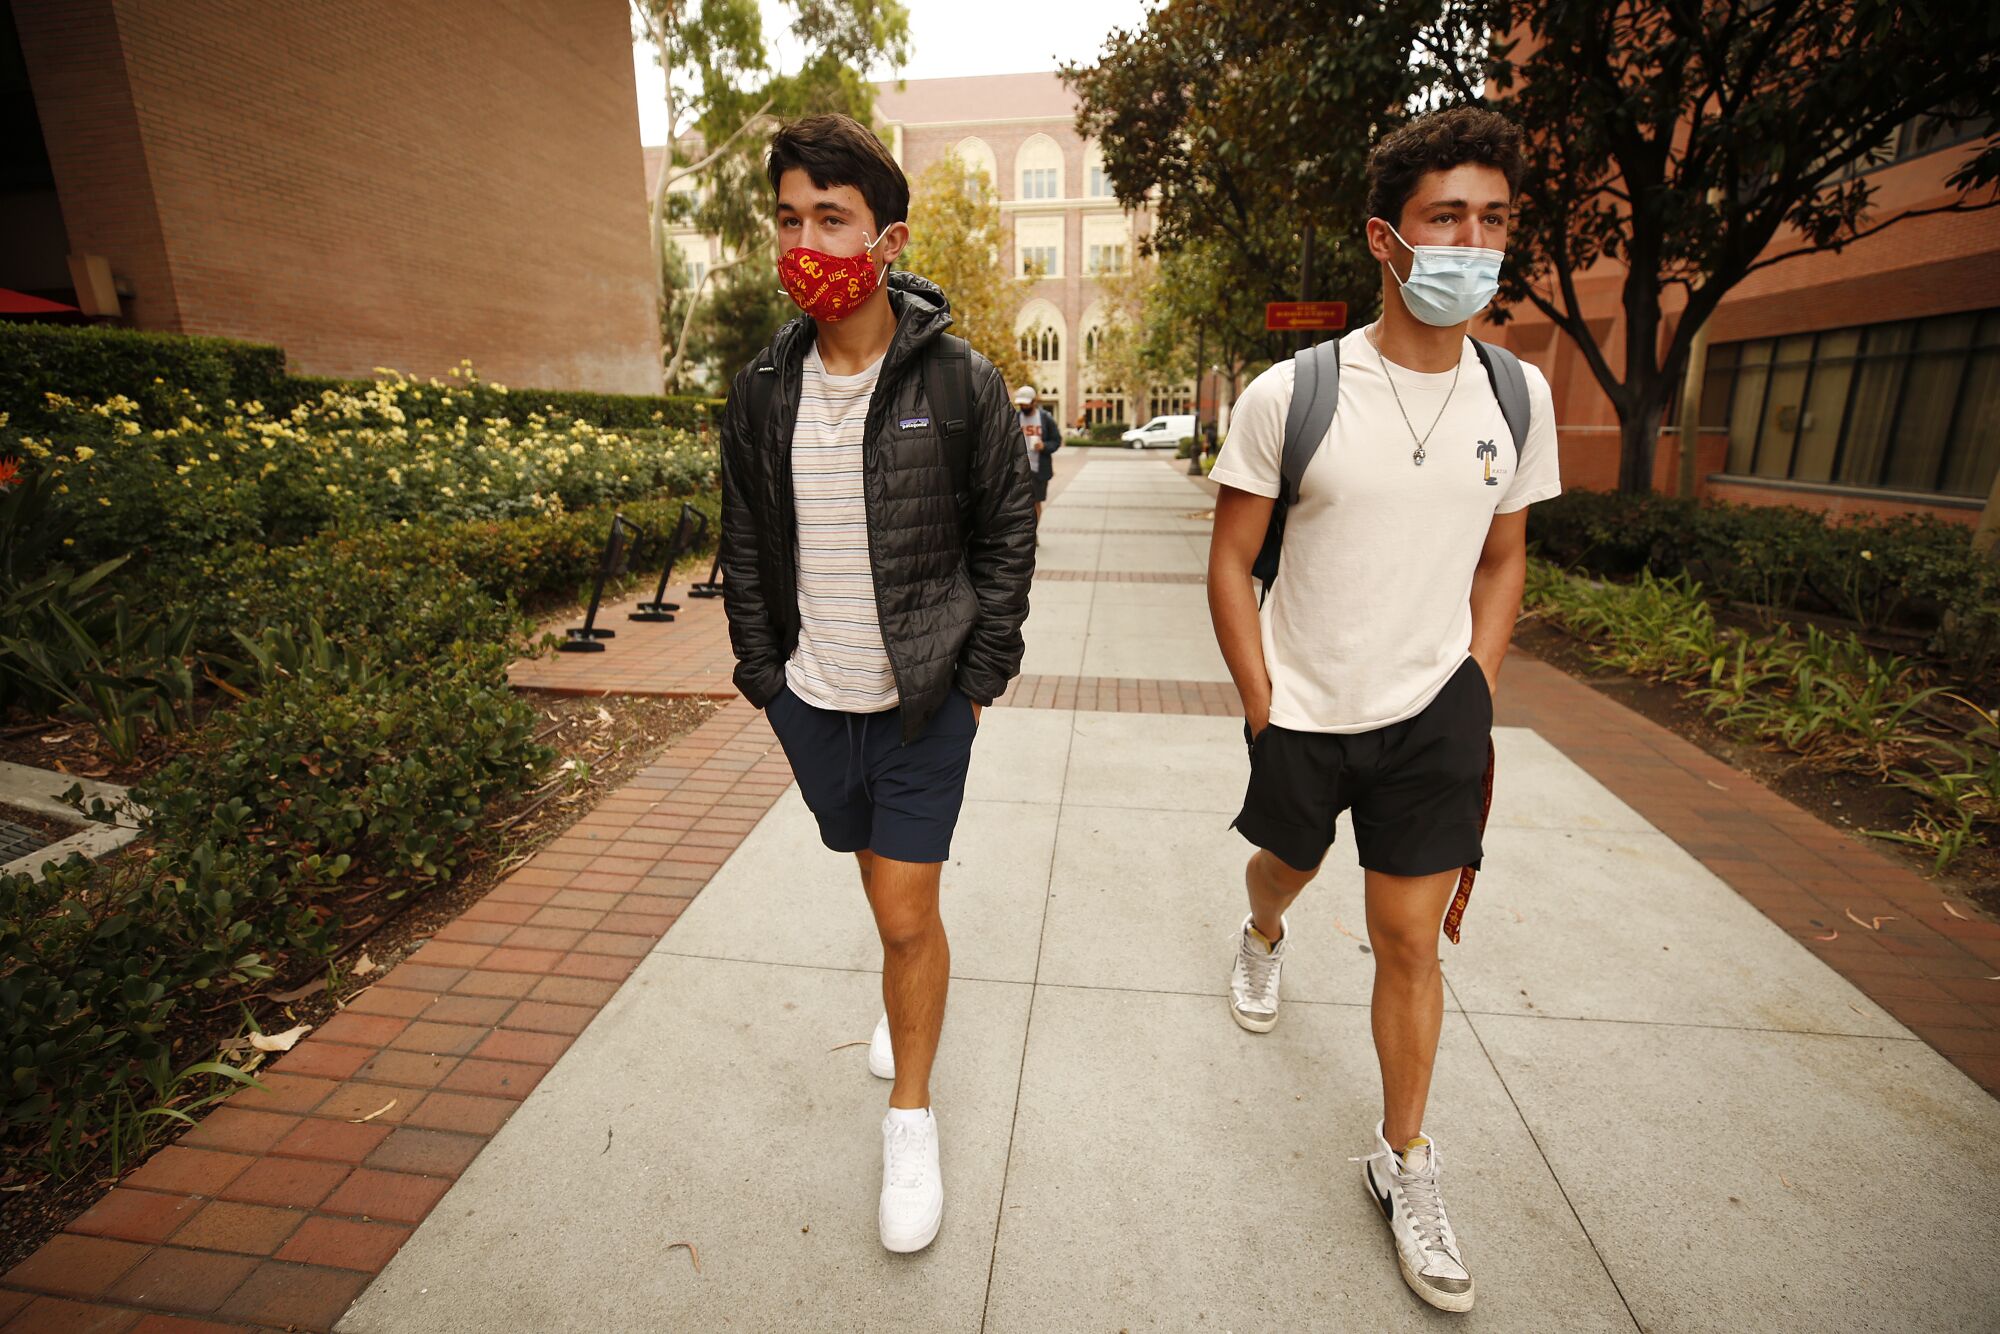 Brothers Ryan, right, and Evan Abdollahi, walk to their classes on the USC campus for the first day of in-person classes.